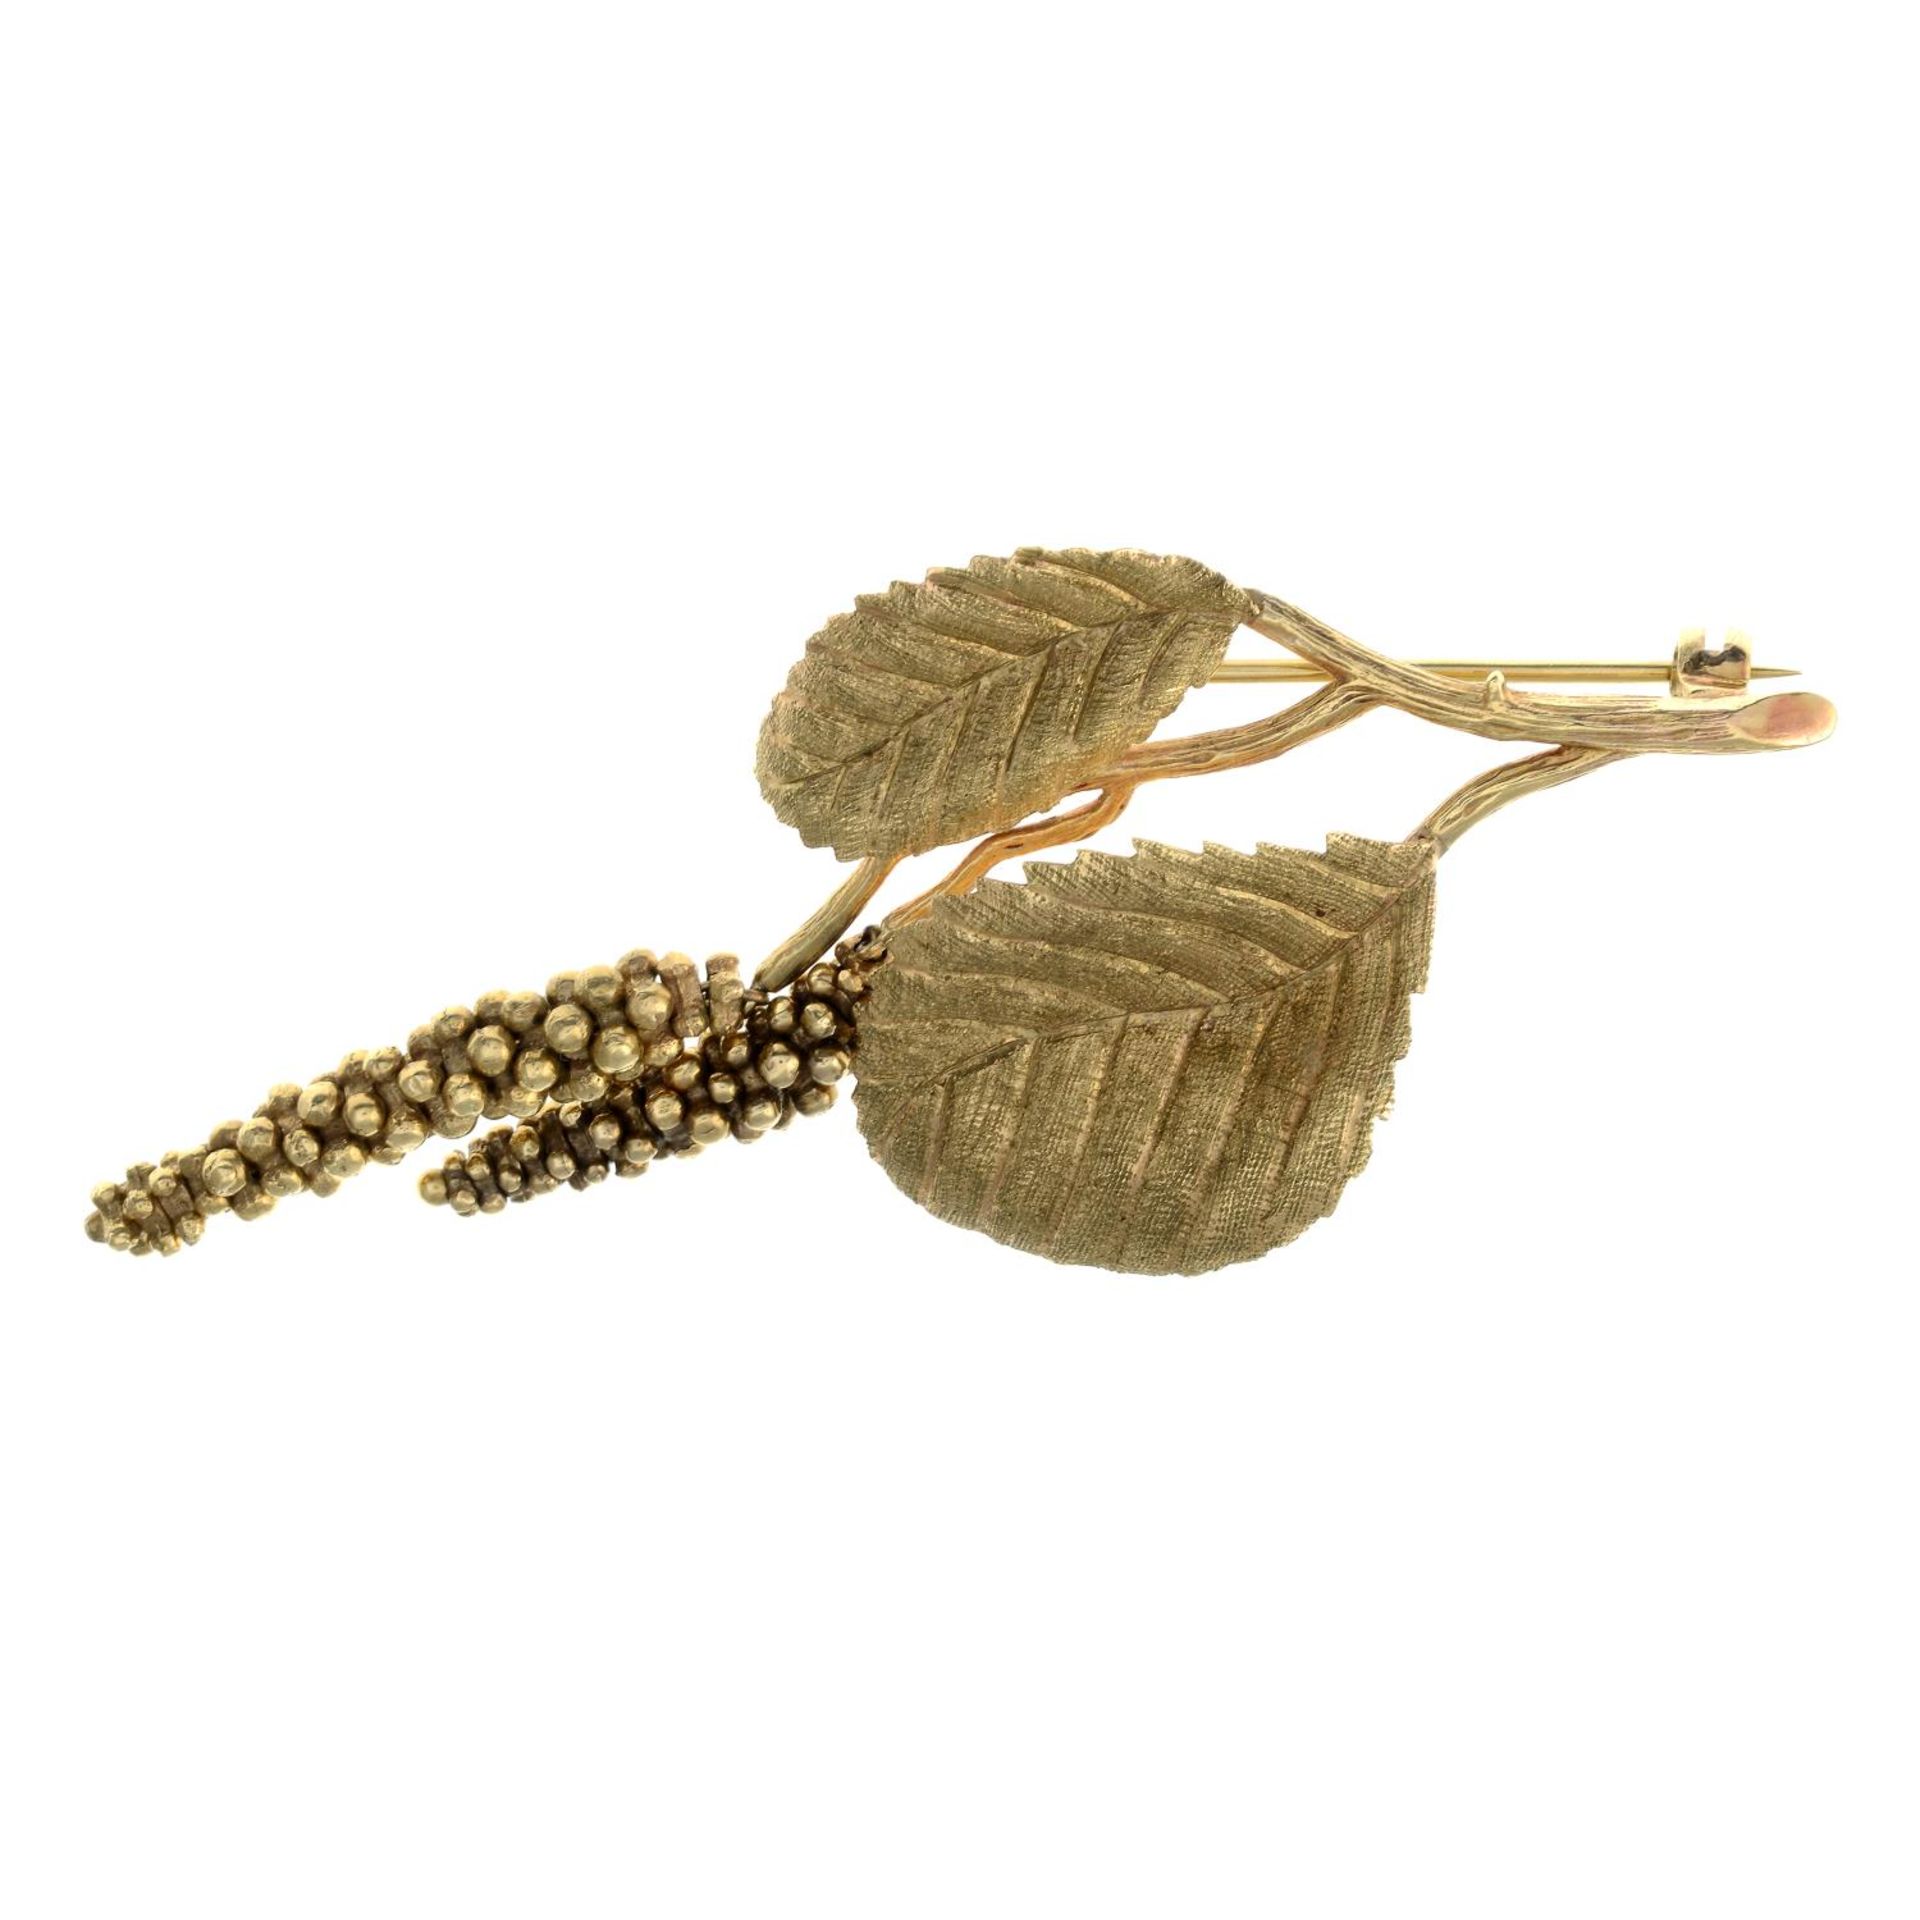 A 9ct gold brooch, designed to depict textured leaves and catkins.Hallmarks for 9ct gold.